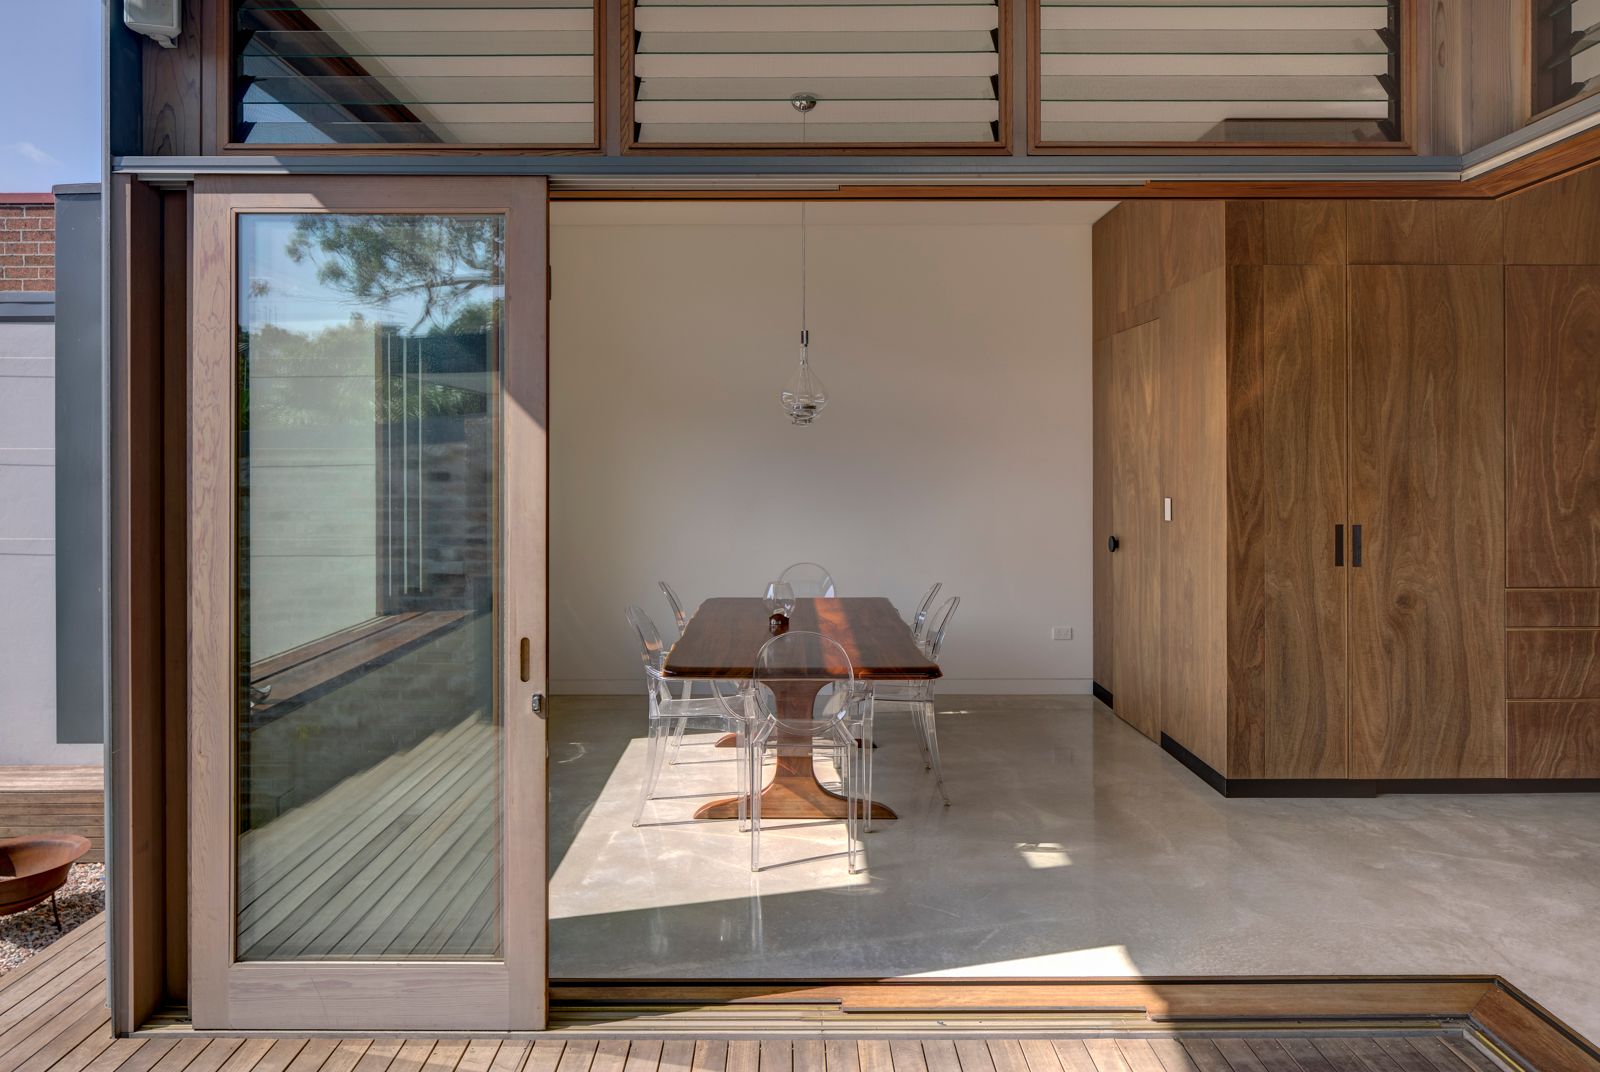 Sky House by Marra+Yeh Architects showing interior view of dining space